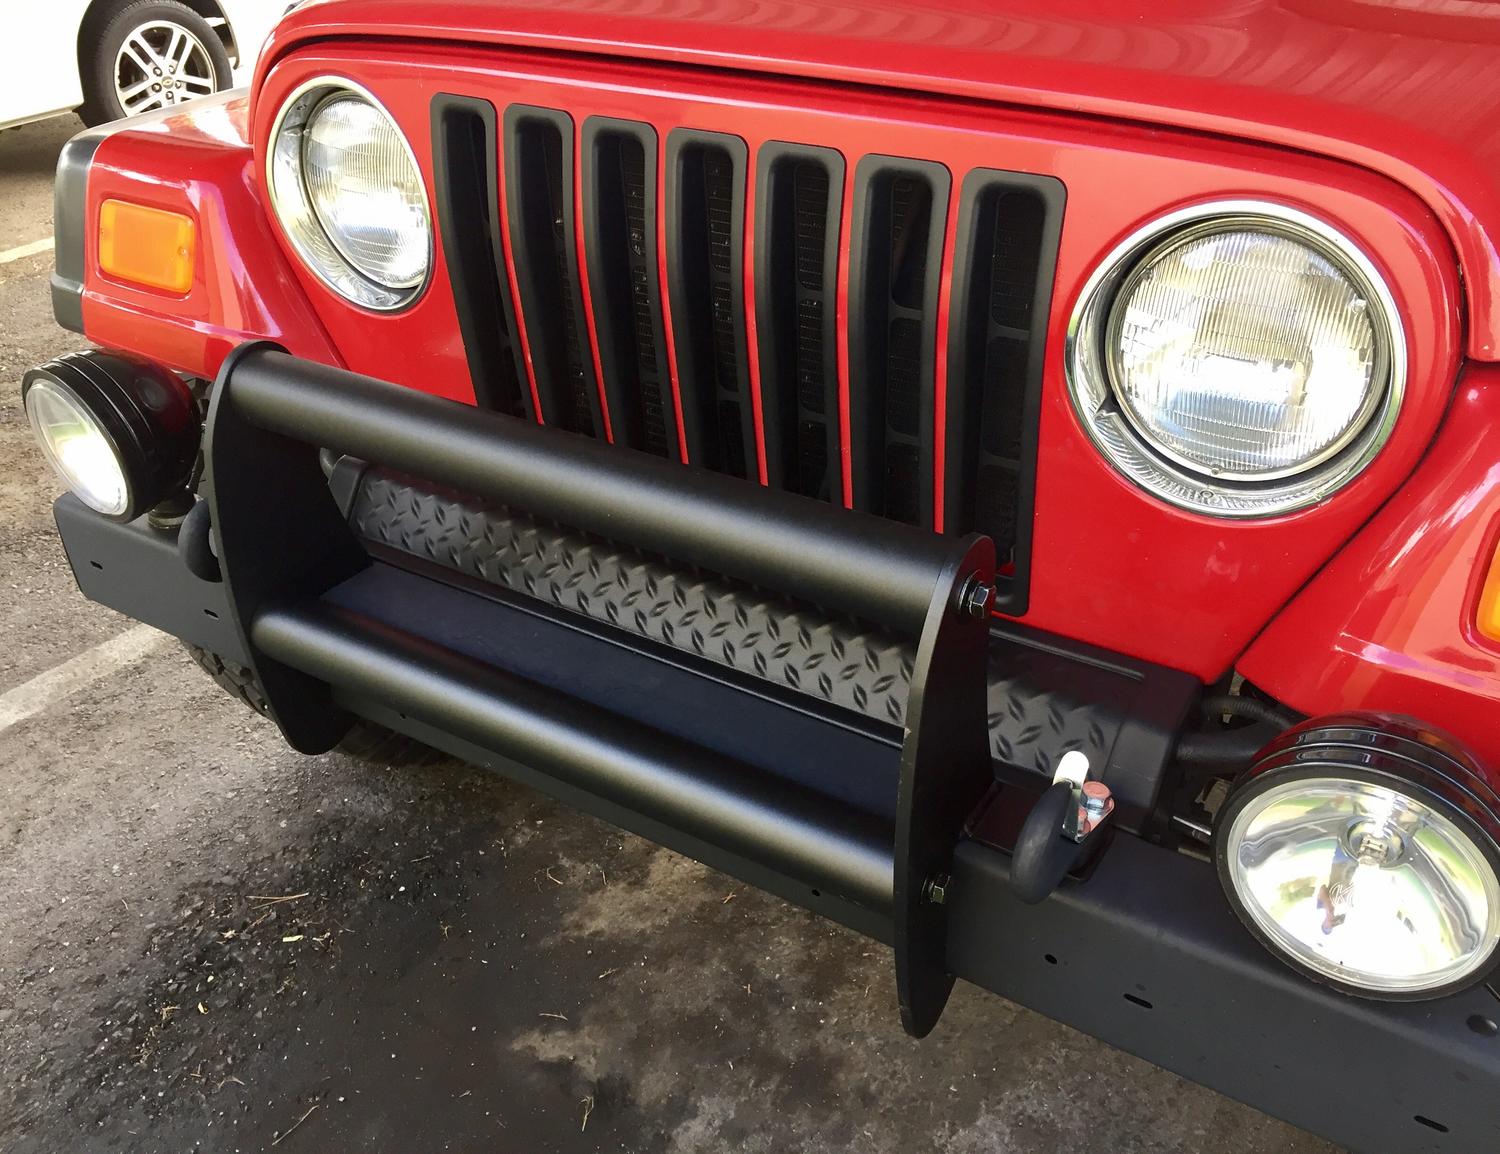 Olympic 4x4 Products Grille Guard for 97-06 Jeep Wrangler TJ